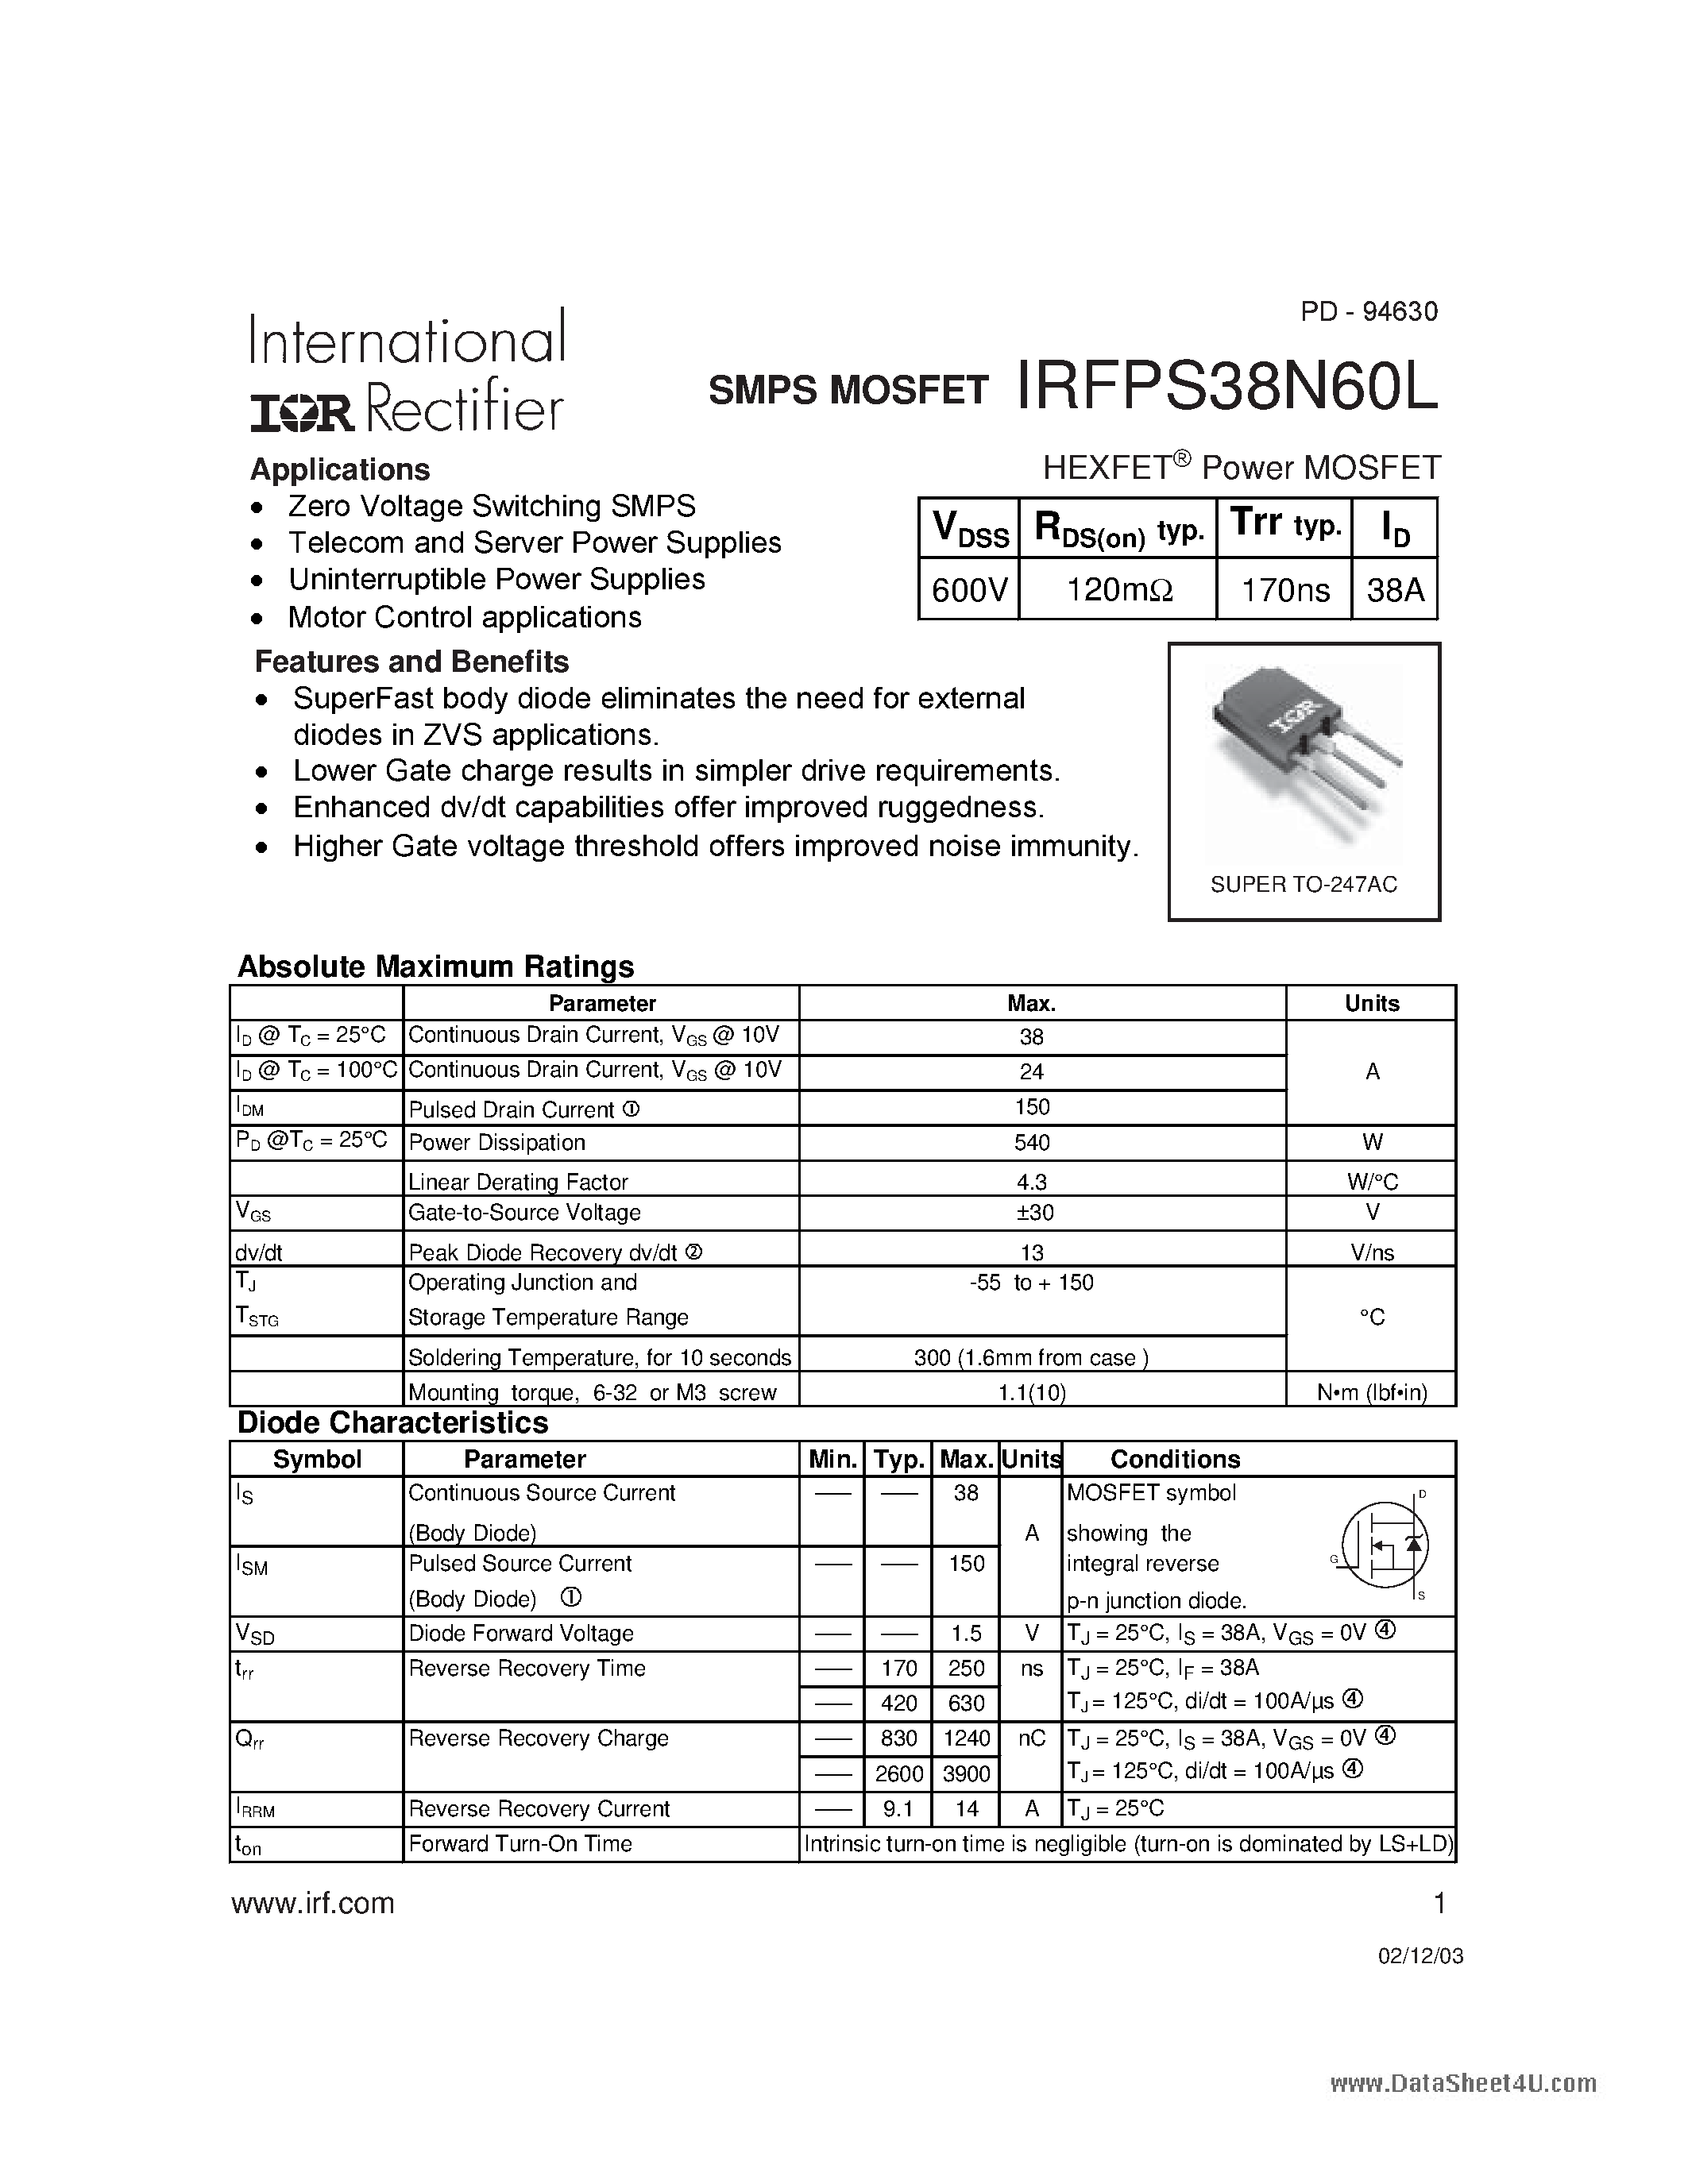 Datasheet IRFPS38N60L - HEXFET Power MOSFET page 1